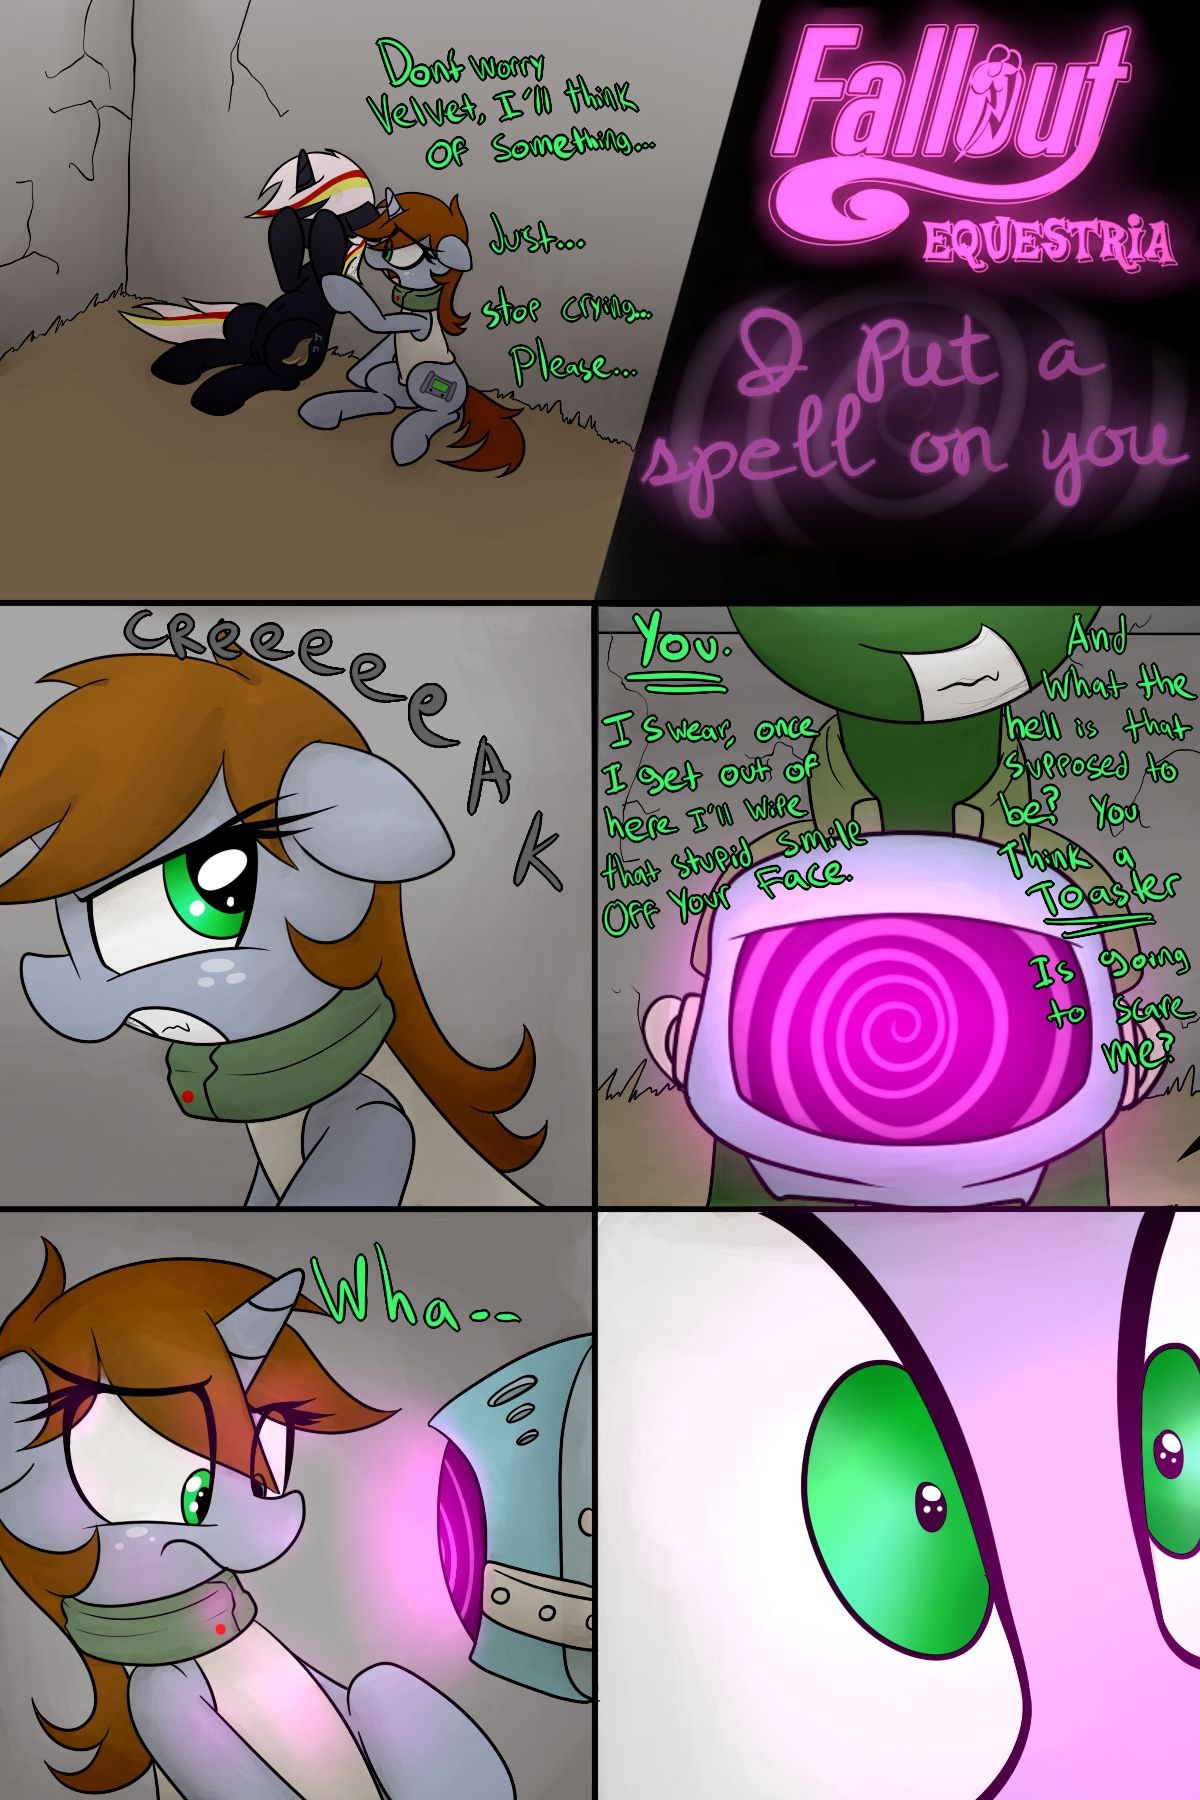 Fallout Equestria – I Put a Spell on You